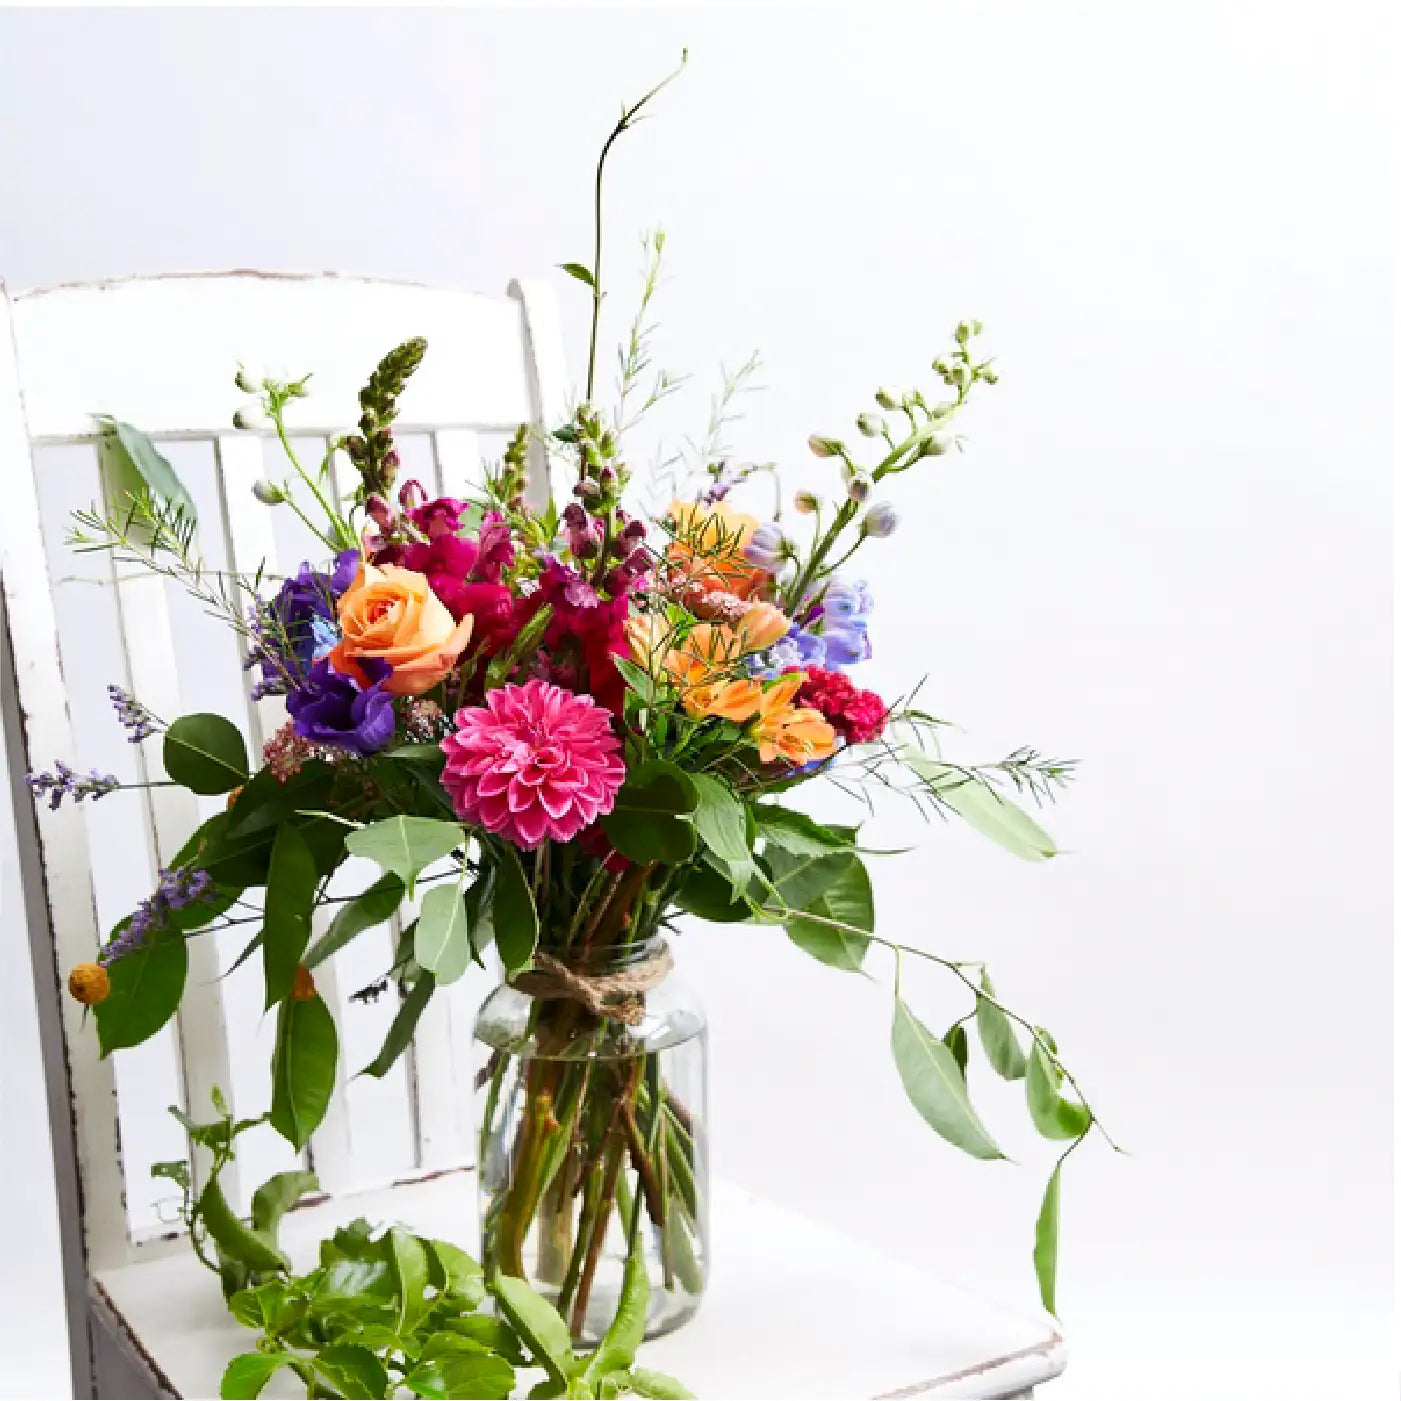 A vibrant bouquet of flowers in a glass jar, featuring orange roses, pink dahlias, purple lisianthus, and assorted greenery, placed on a white wooden chair. Business Gifting. Fabulous Flowers and Gifts.